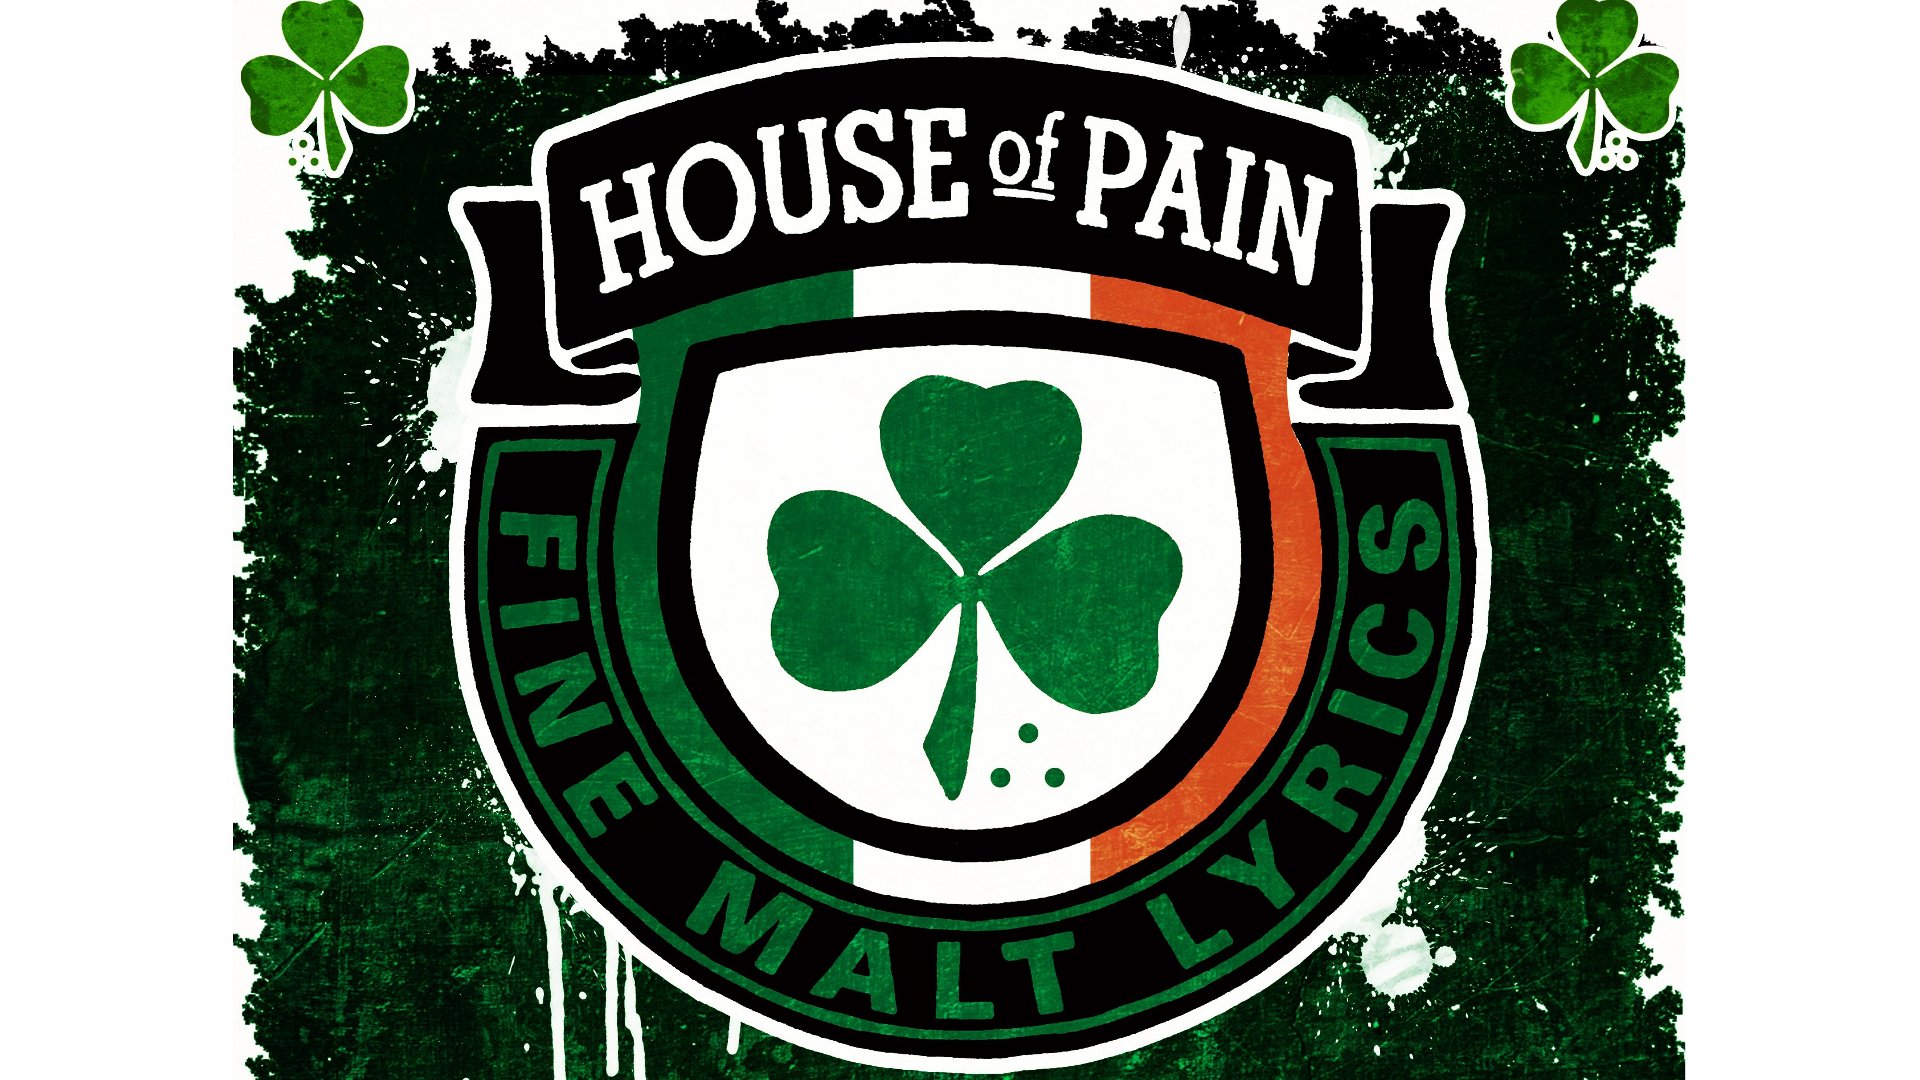  house of pain the house of pain hip hop rap rock and indie